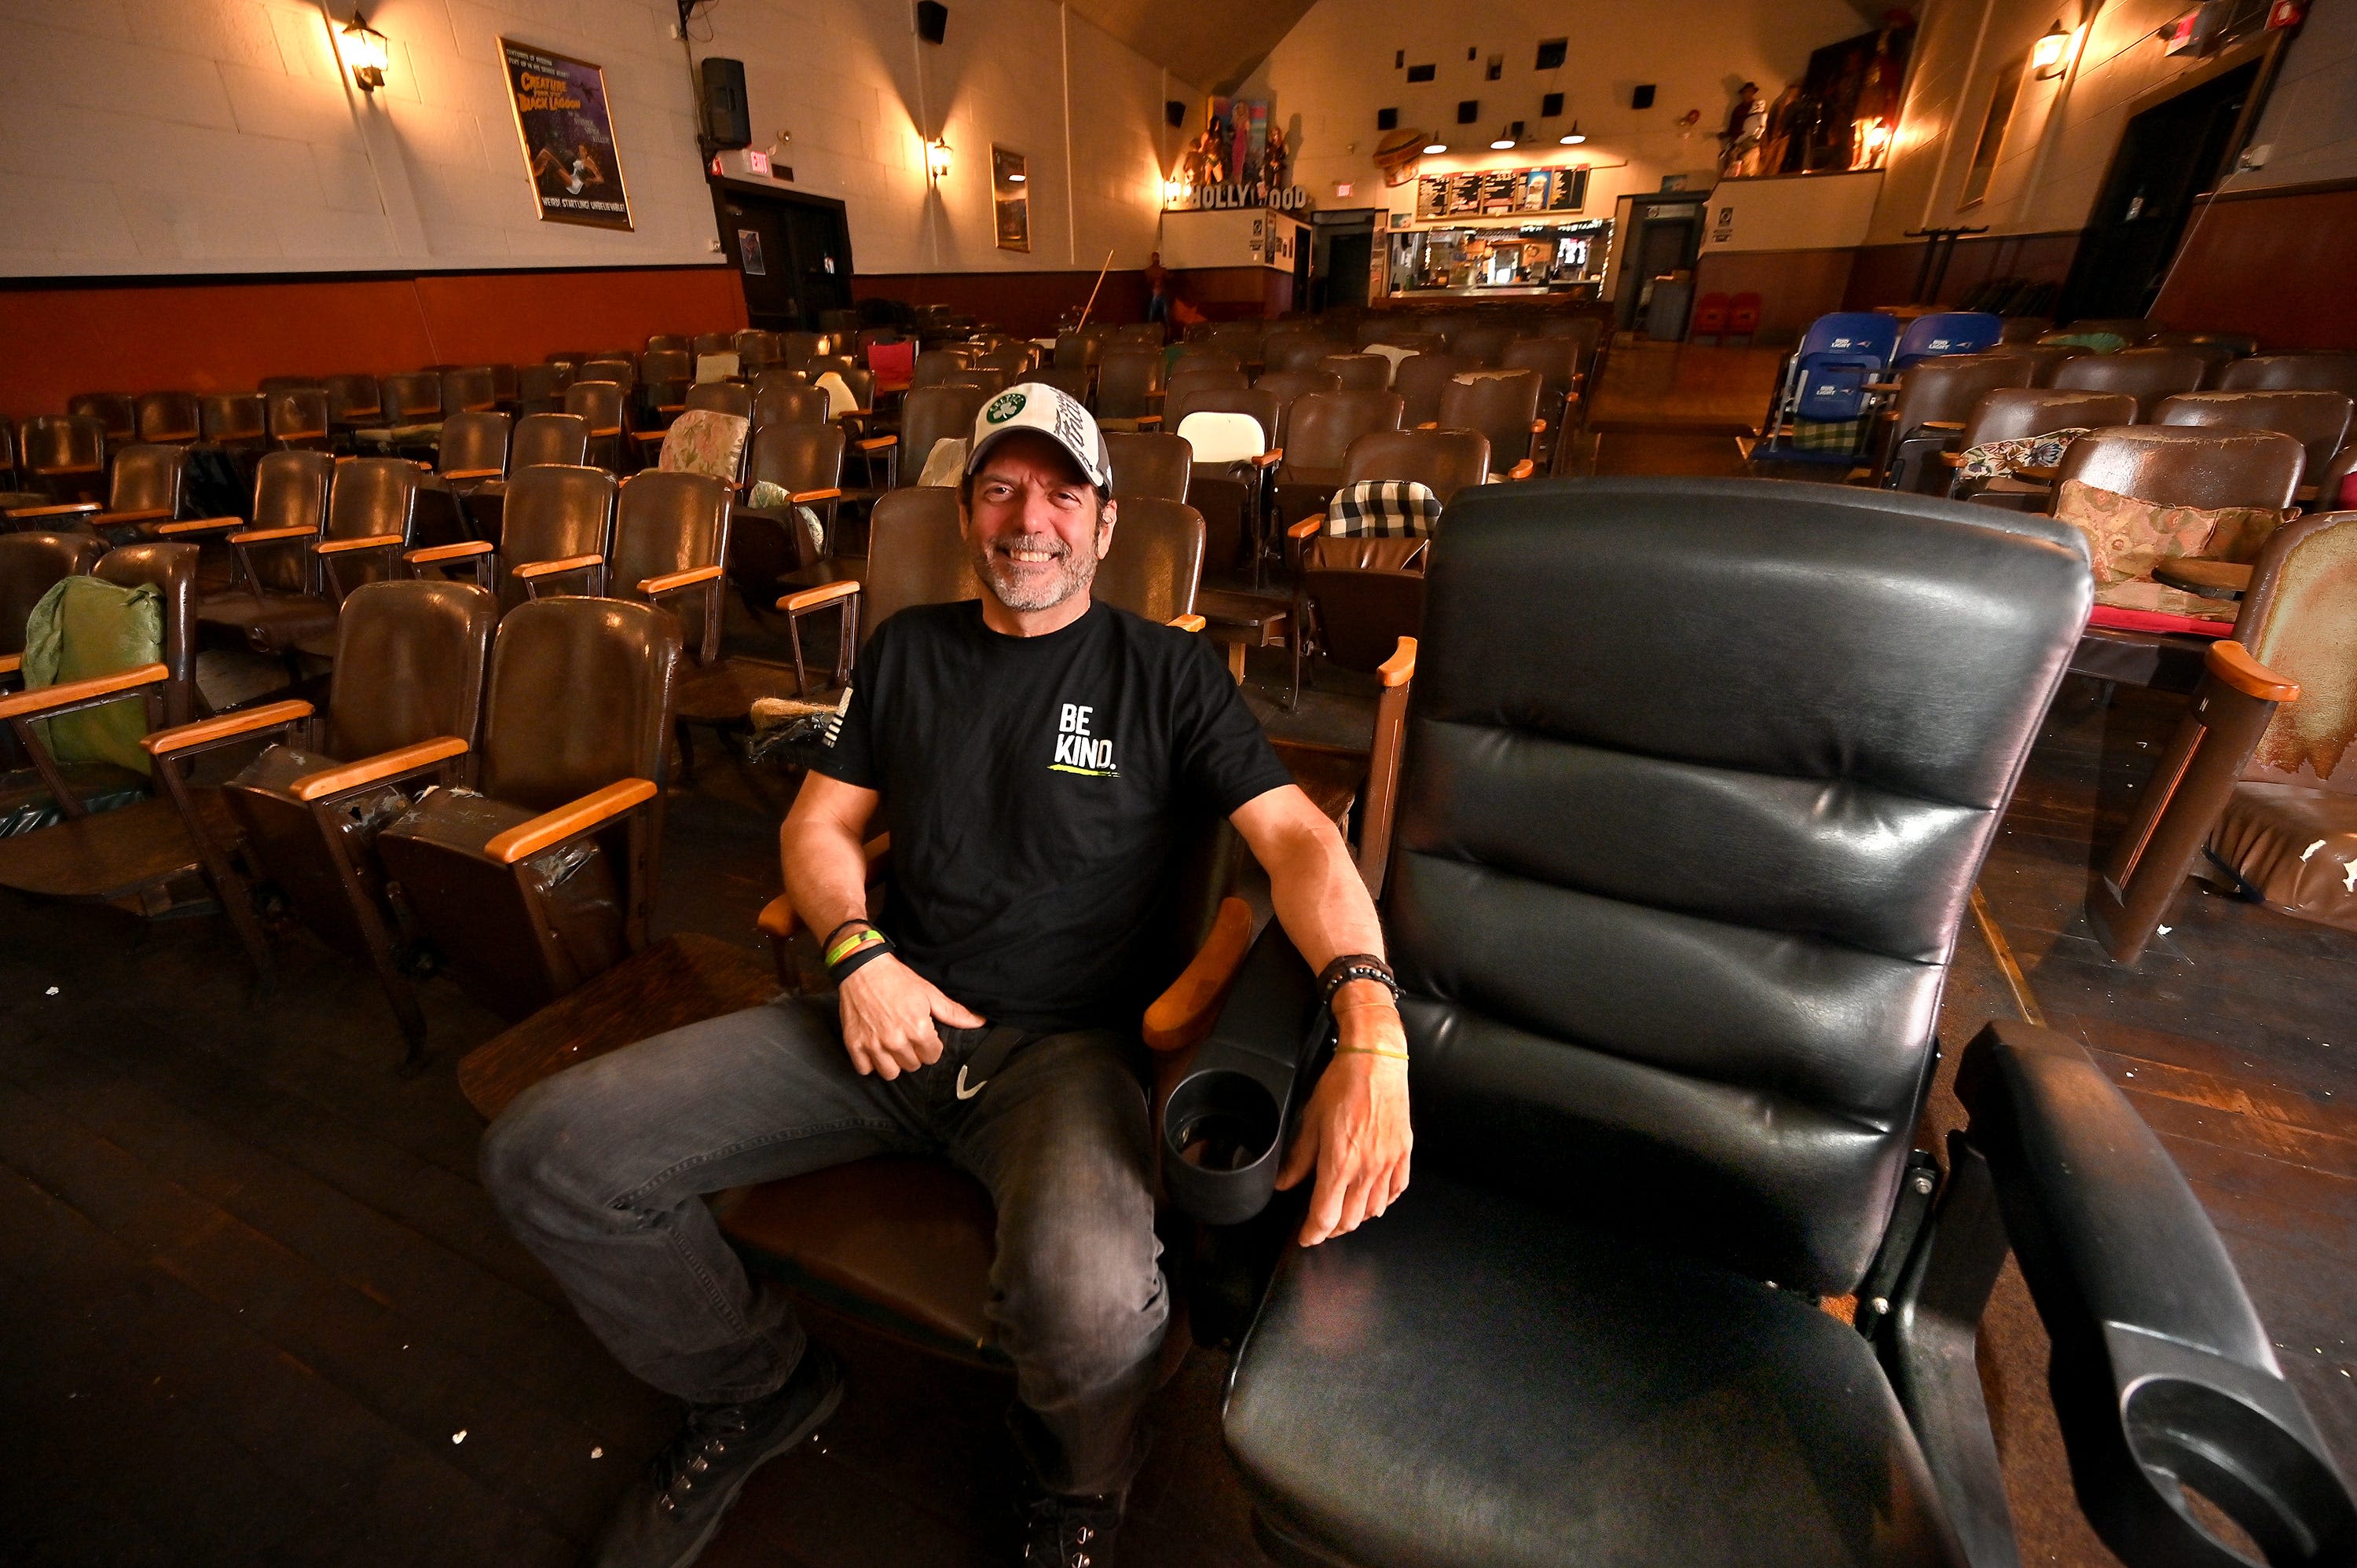 On (soon) with the show: Millbury's Elm Draught House cinema hits pause for renovations